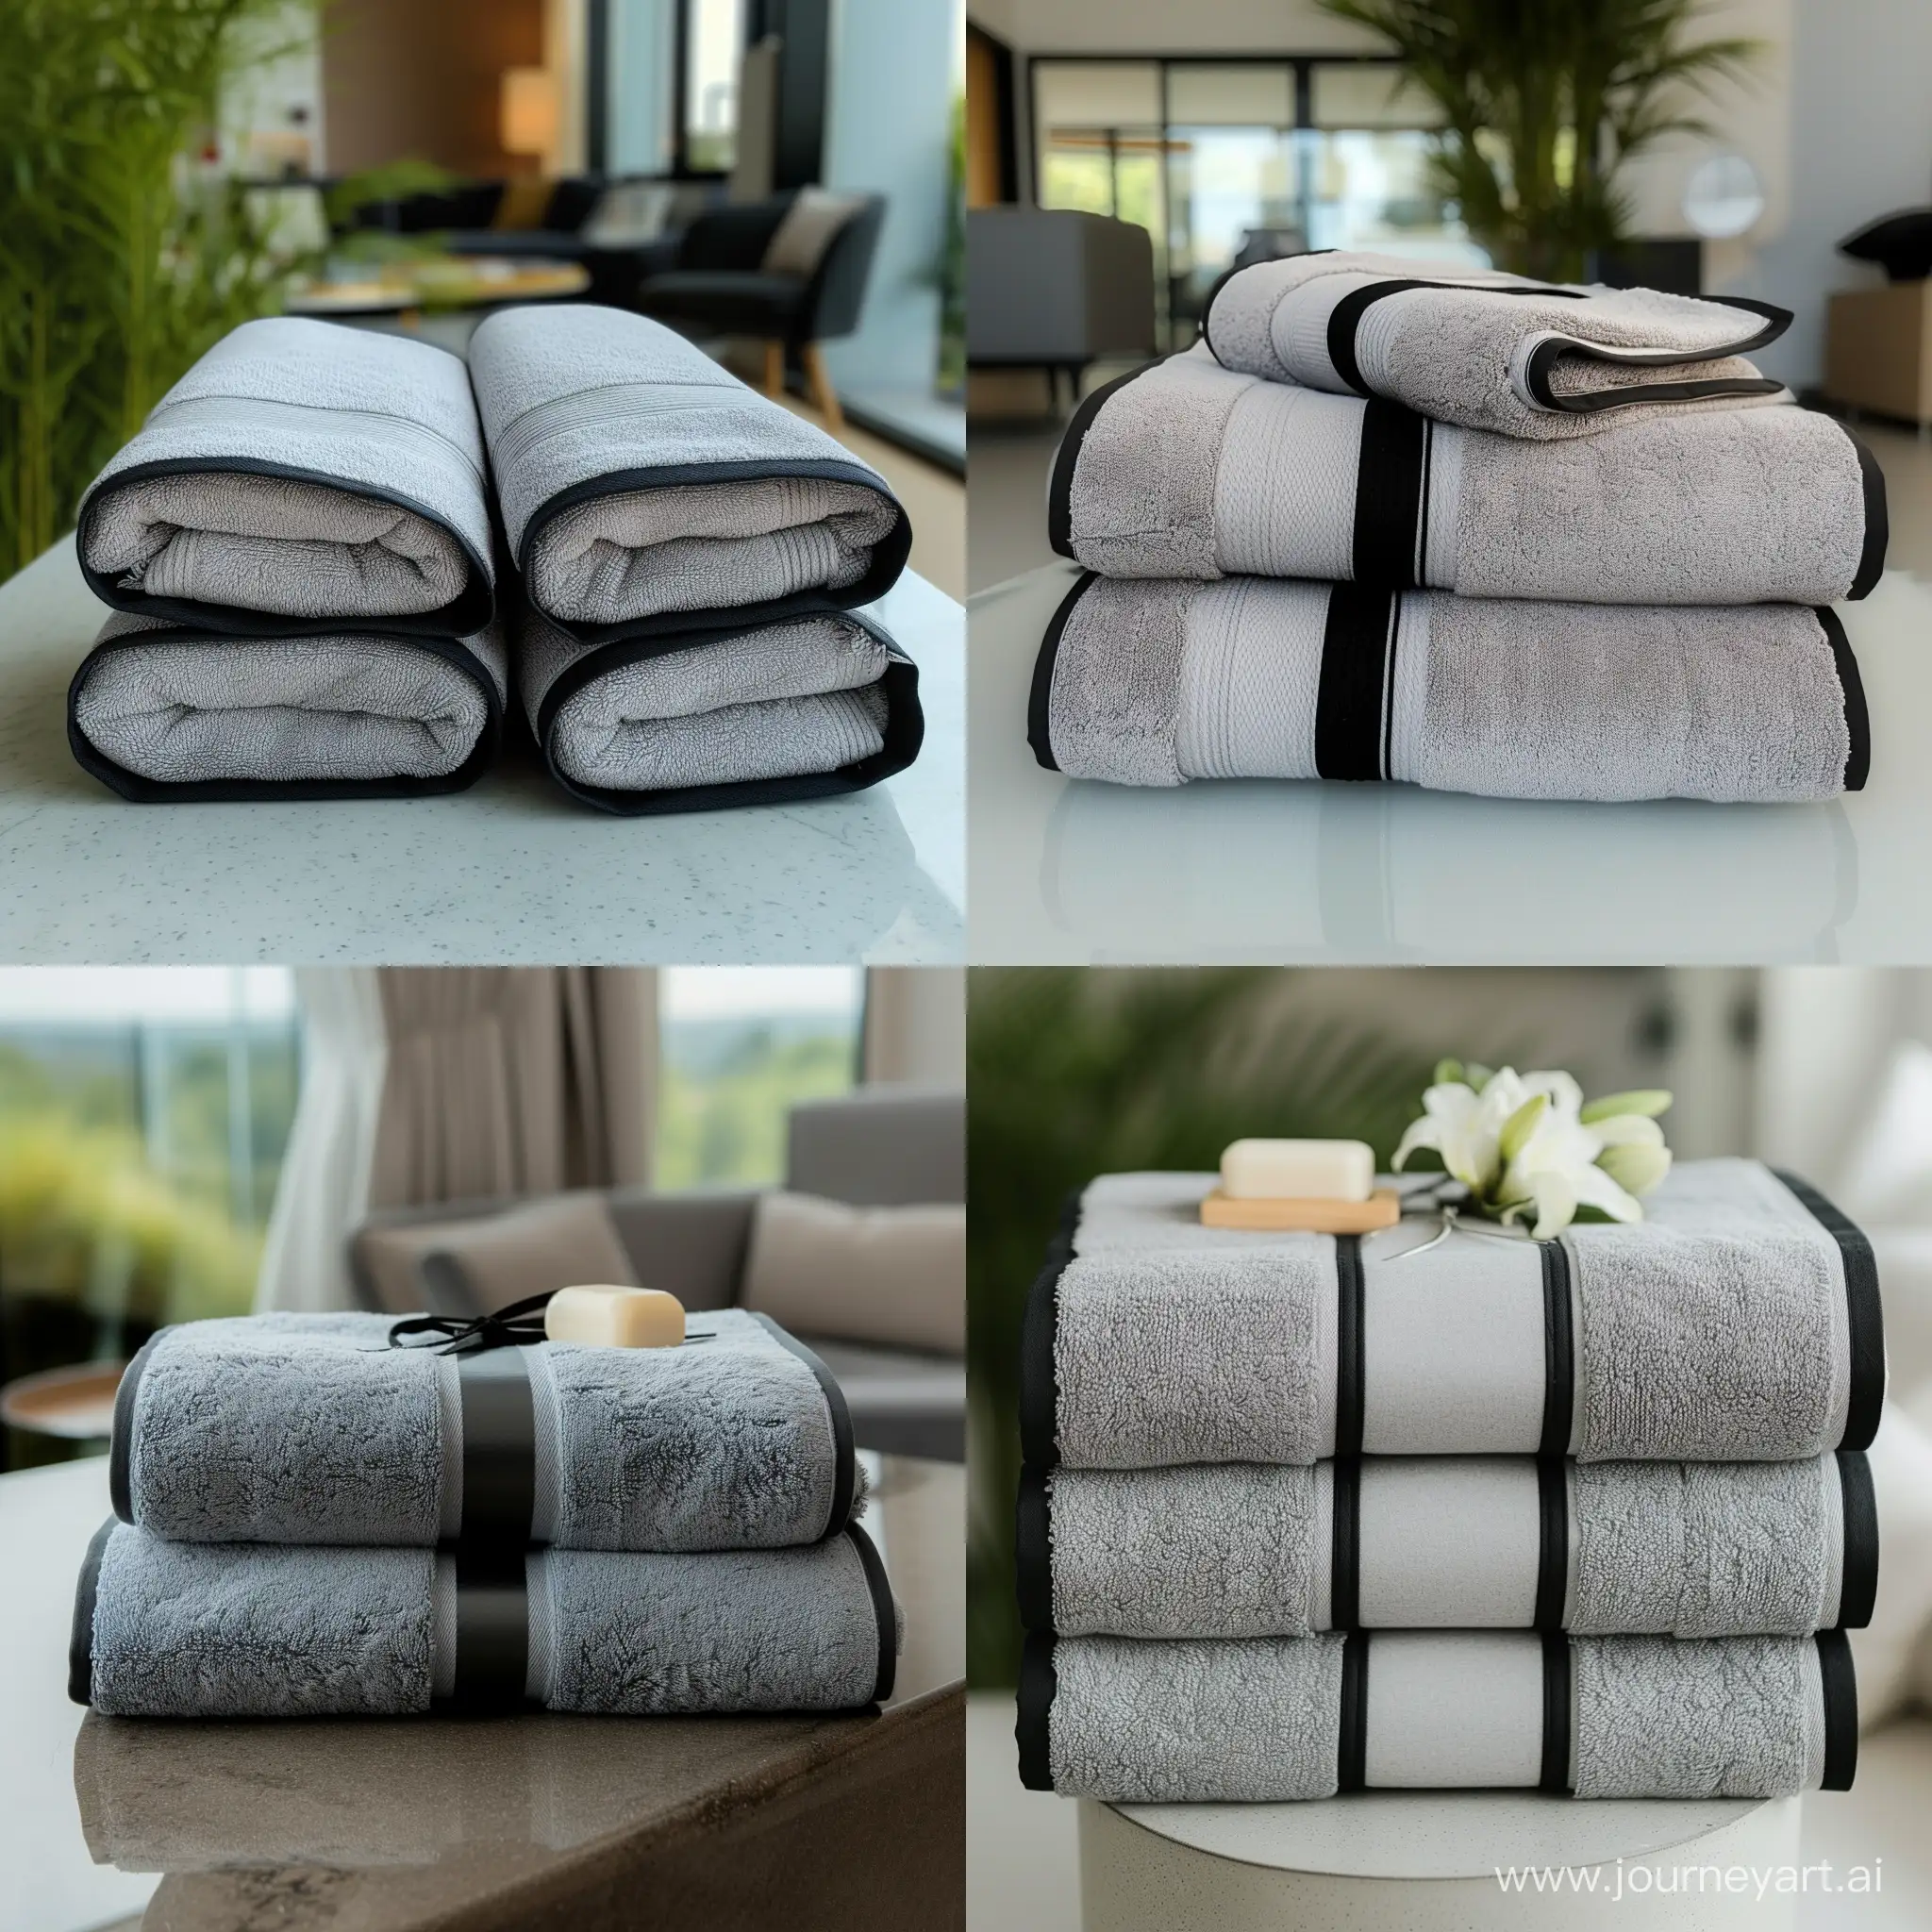 Luxurious-Gray-and-Black-Edged-Bath-Towels-in-Stylish-Gift-Packaging